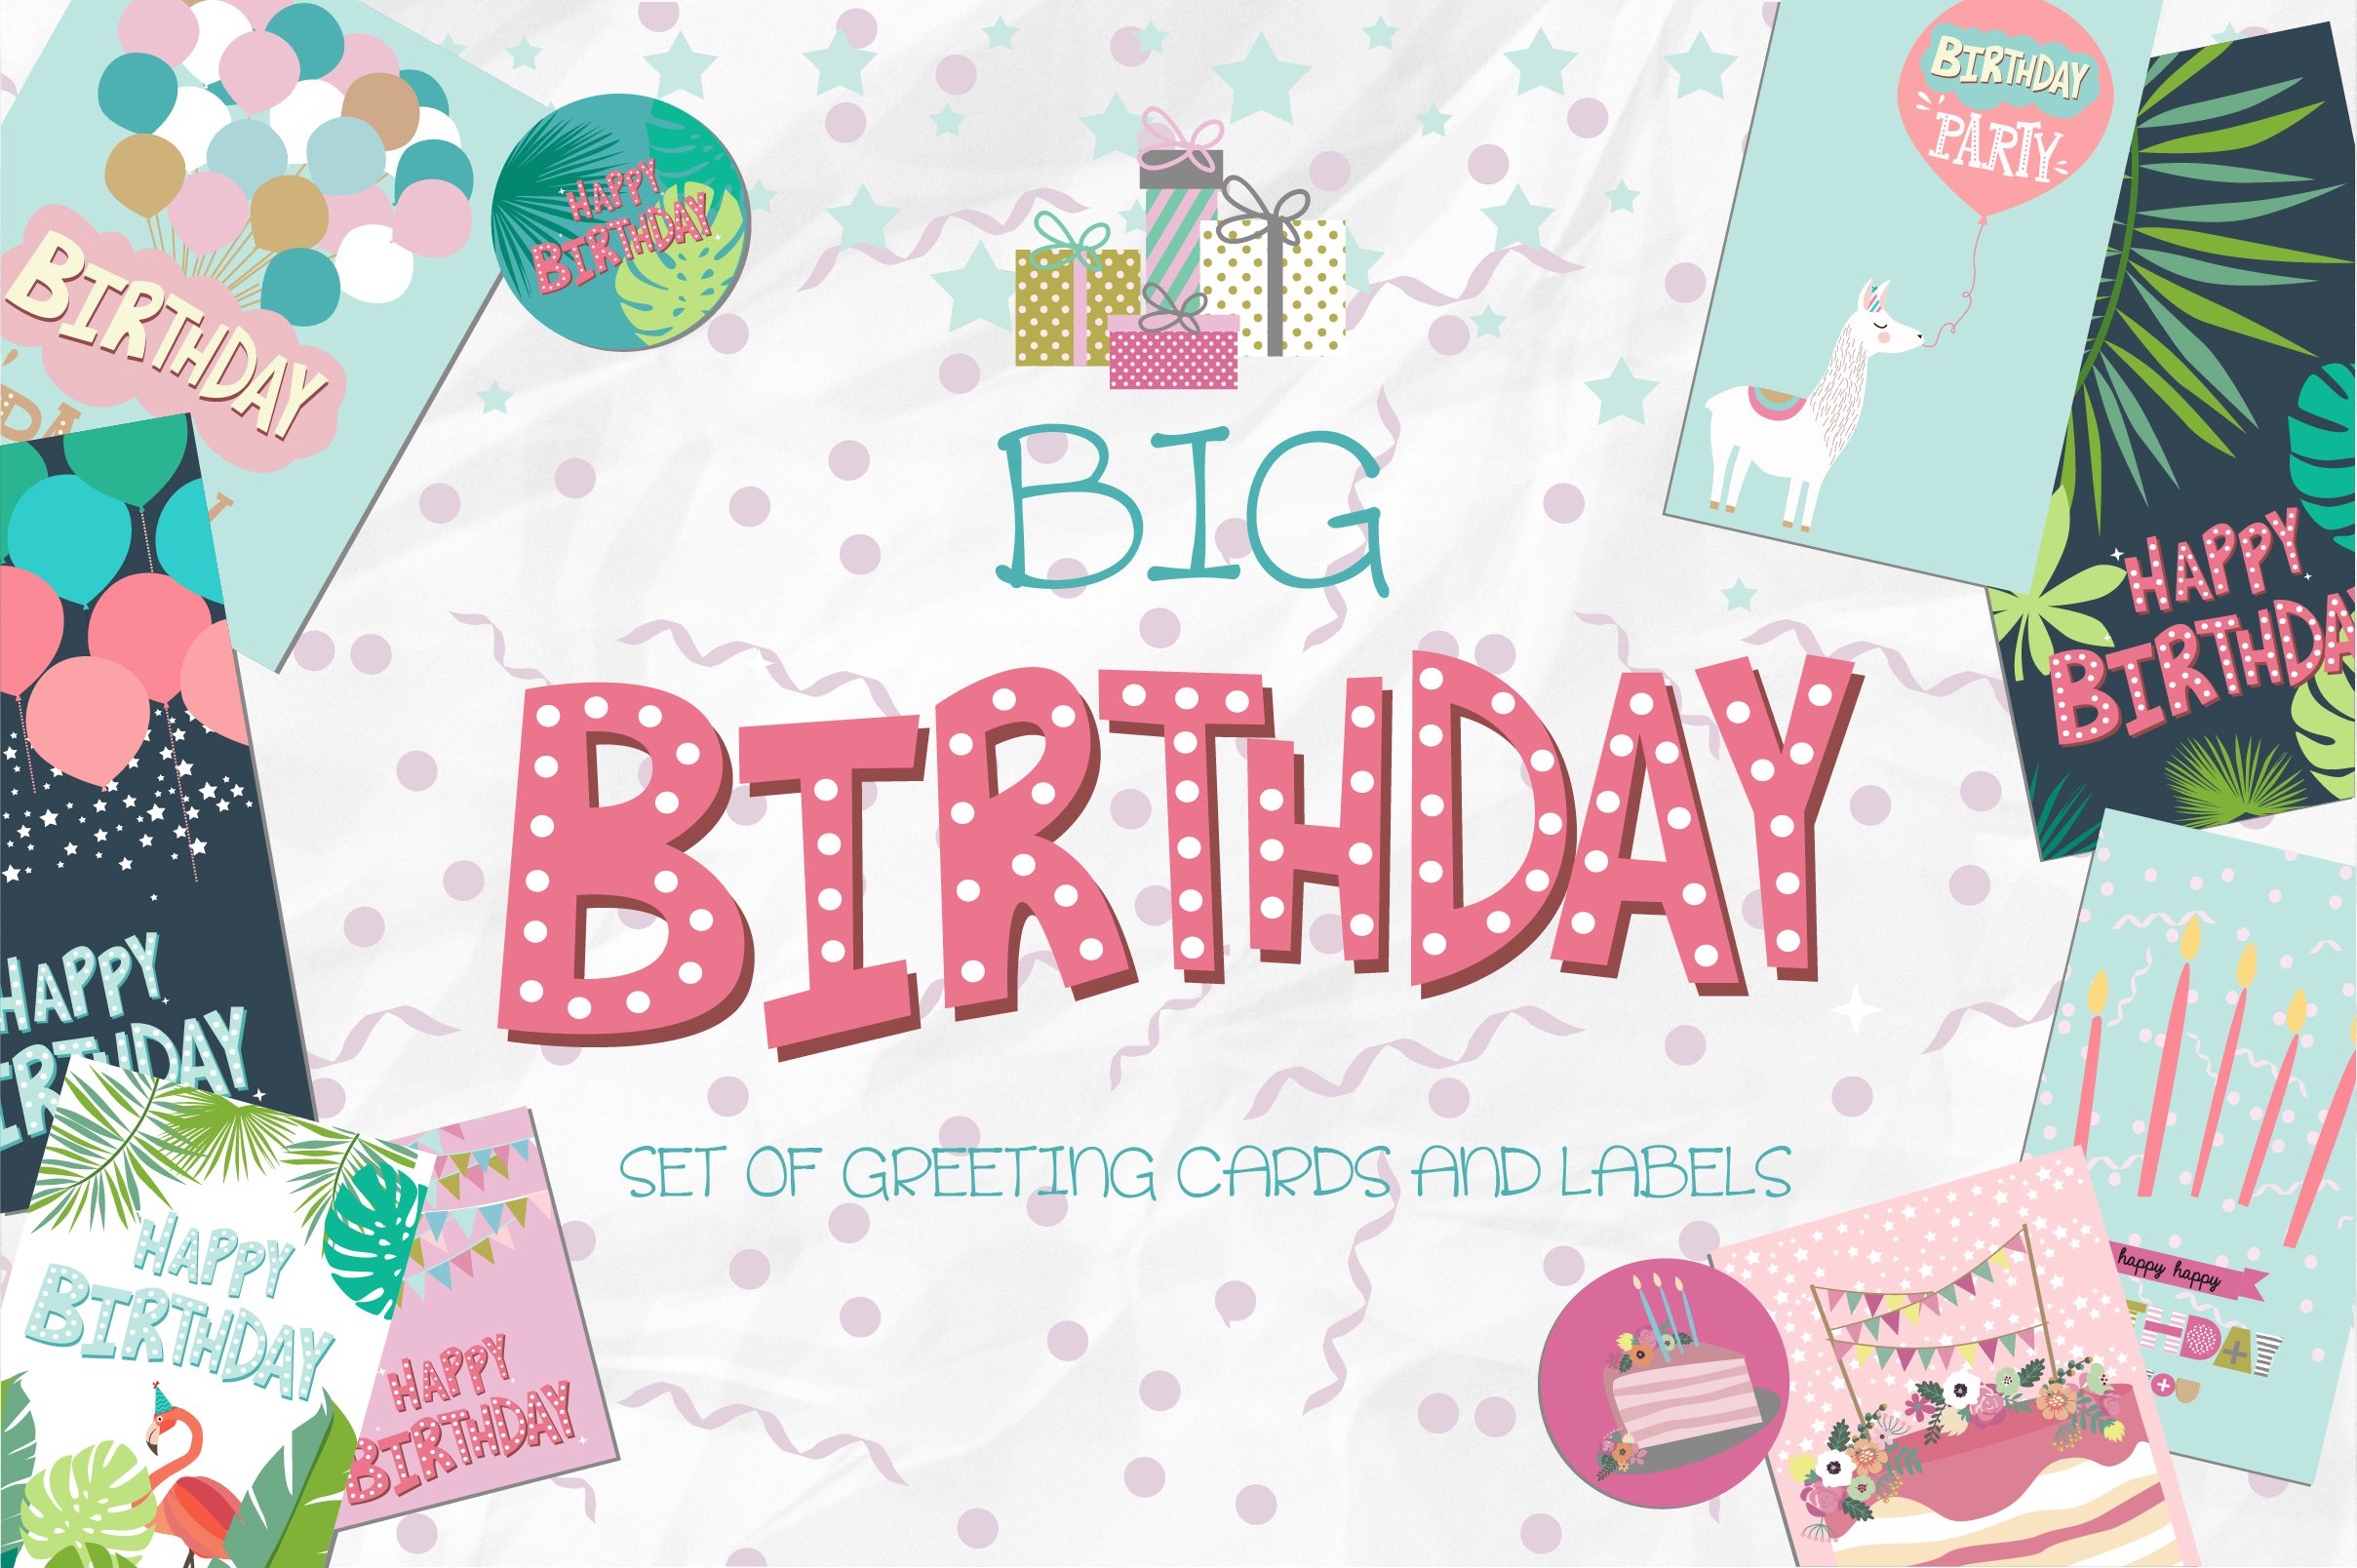 Happy Birthday cards and labels cover image.